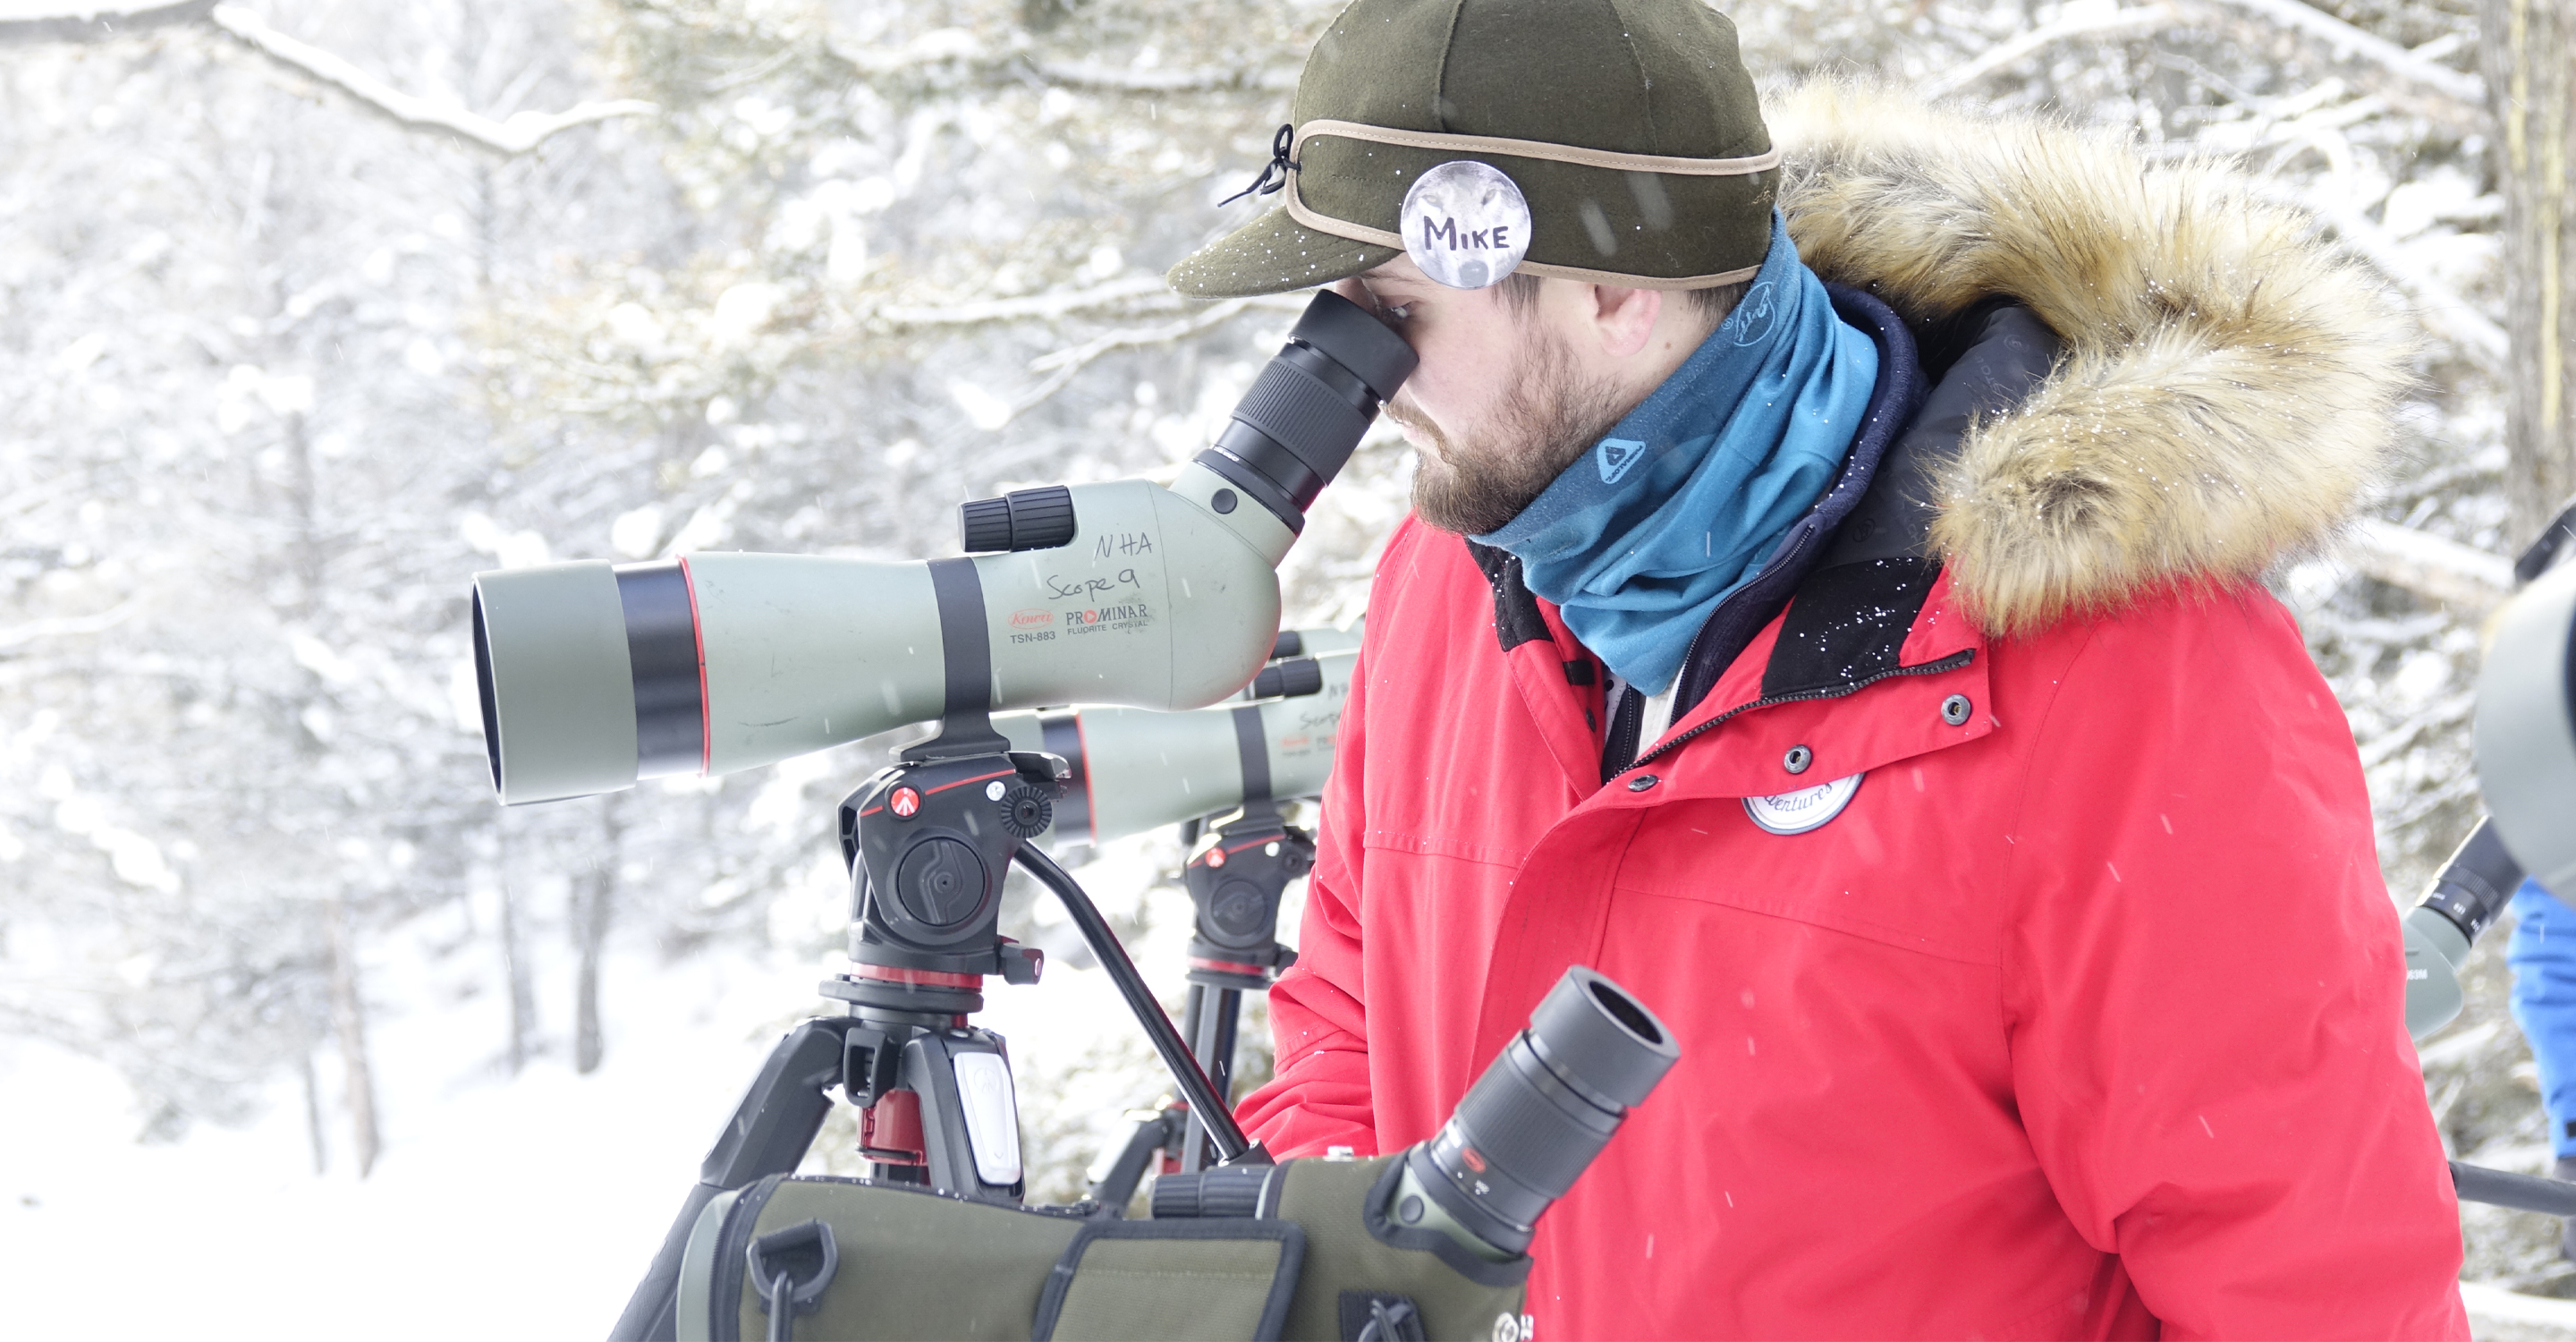 Traveler in Yellowstone National Park views wildlife through a scope, United States